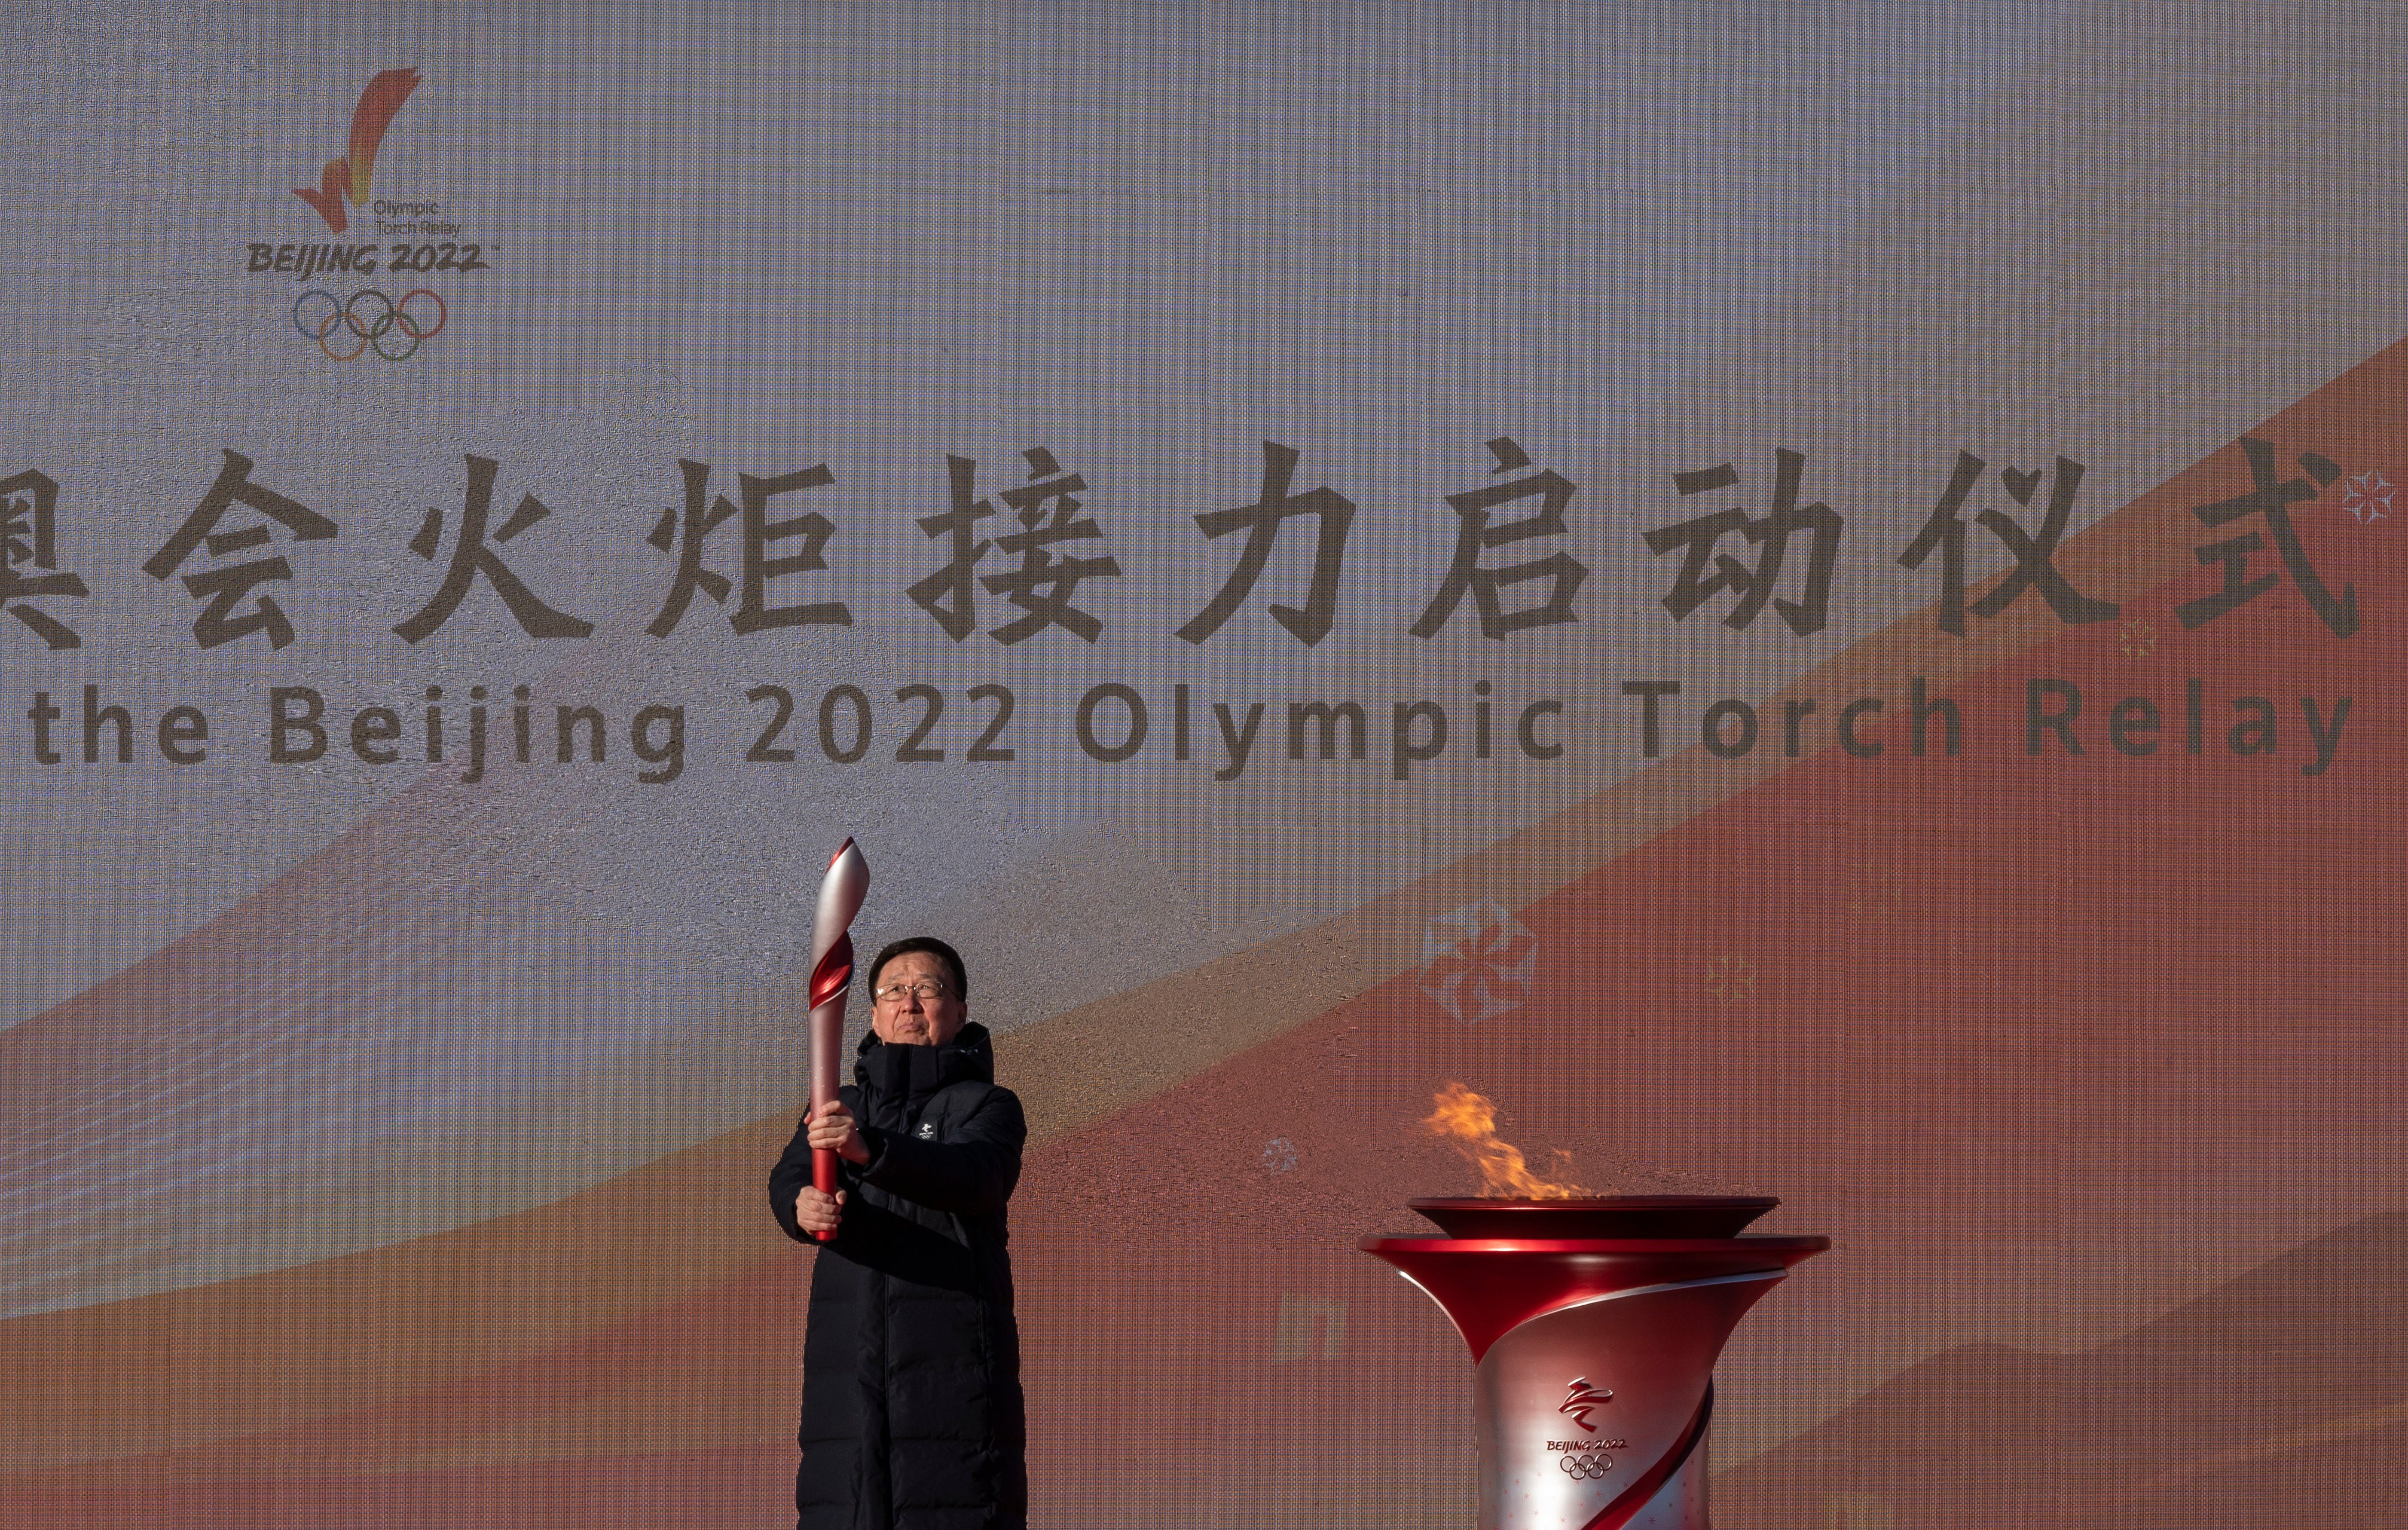 China’s vice premier Han Zheng holds the torch after lighting it during the launch ceremony for the Beijing 2022 Winter Olympics Torch Relay in front of the Olympic Tower outside of the closed loop bubble on 2 February